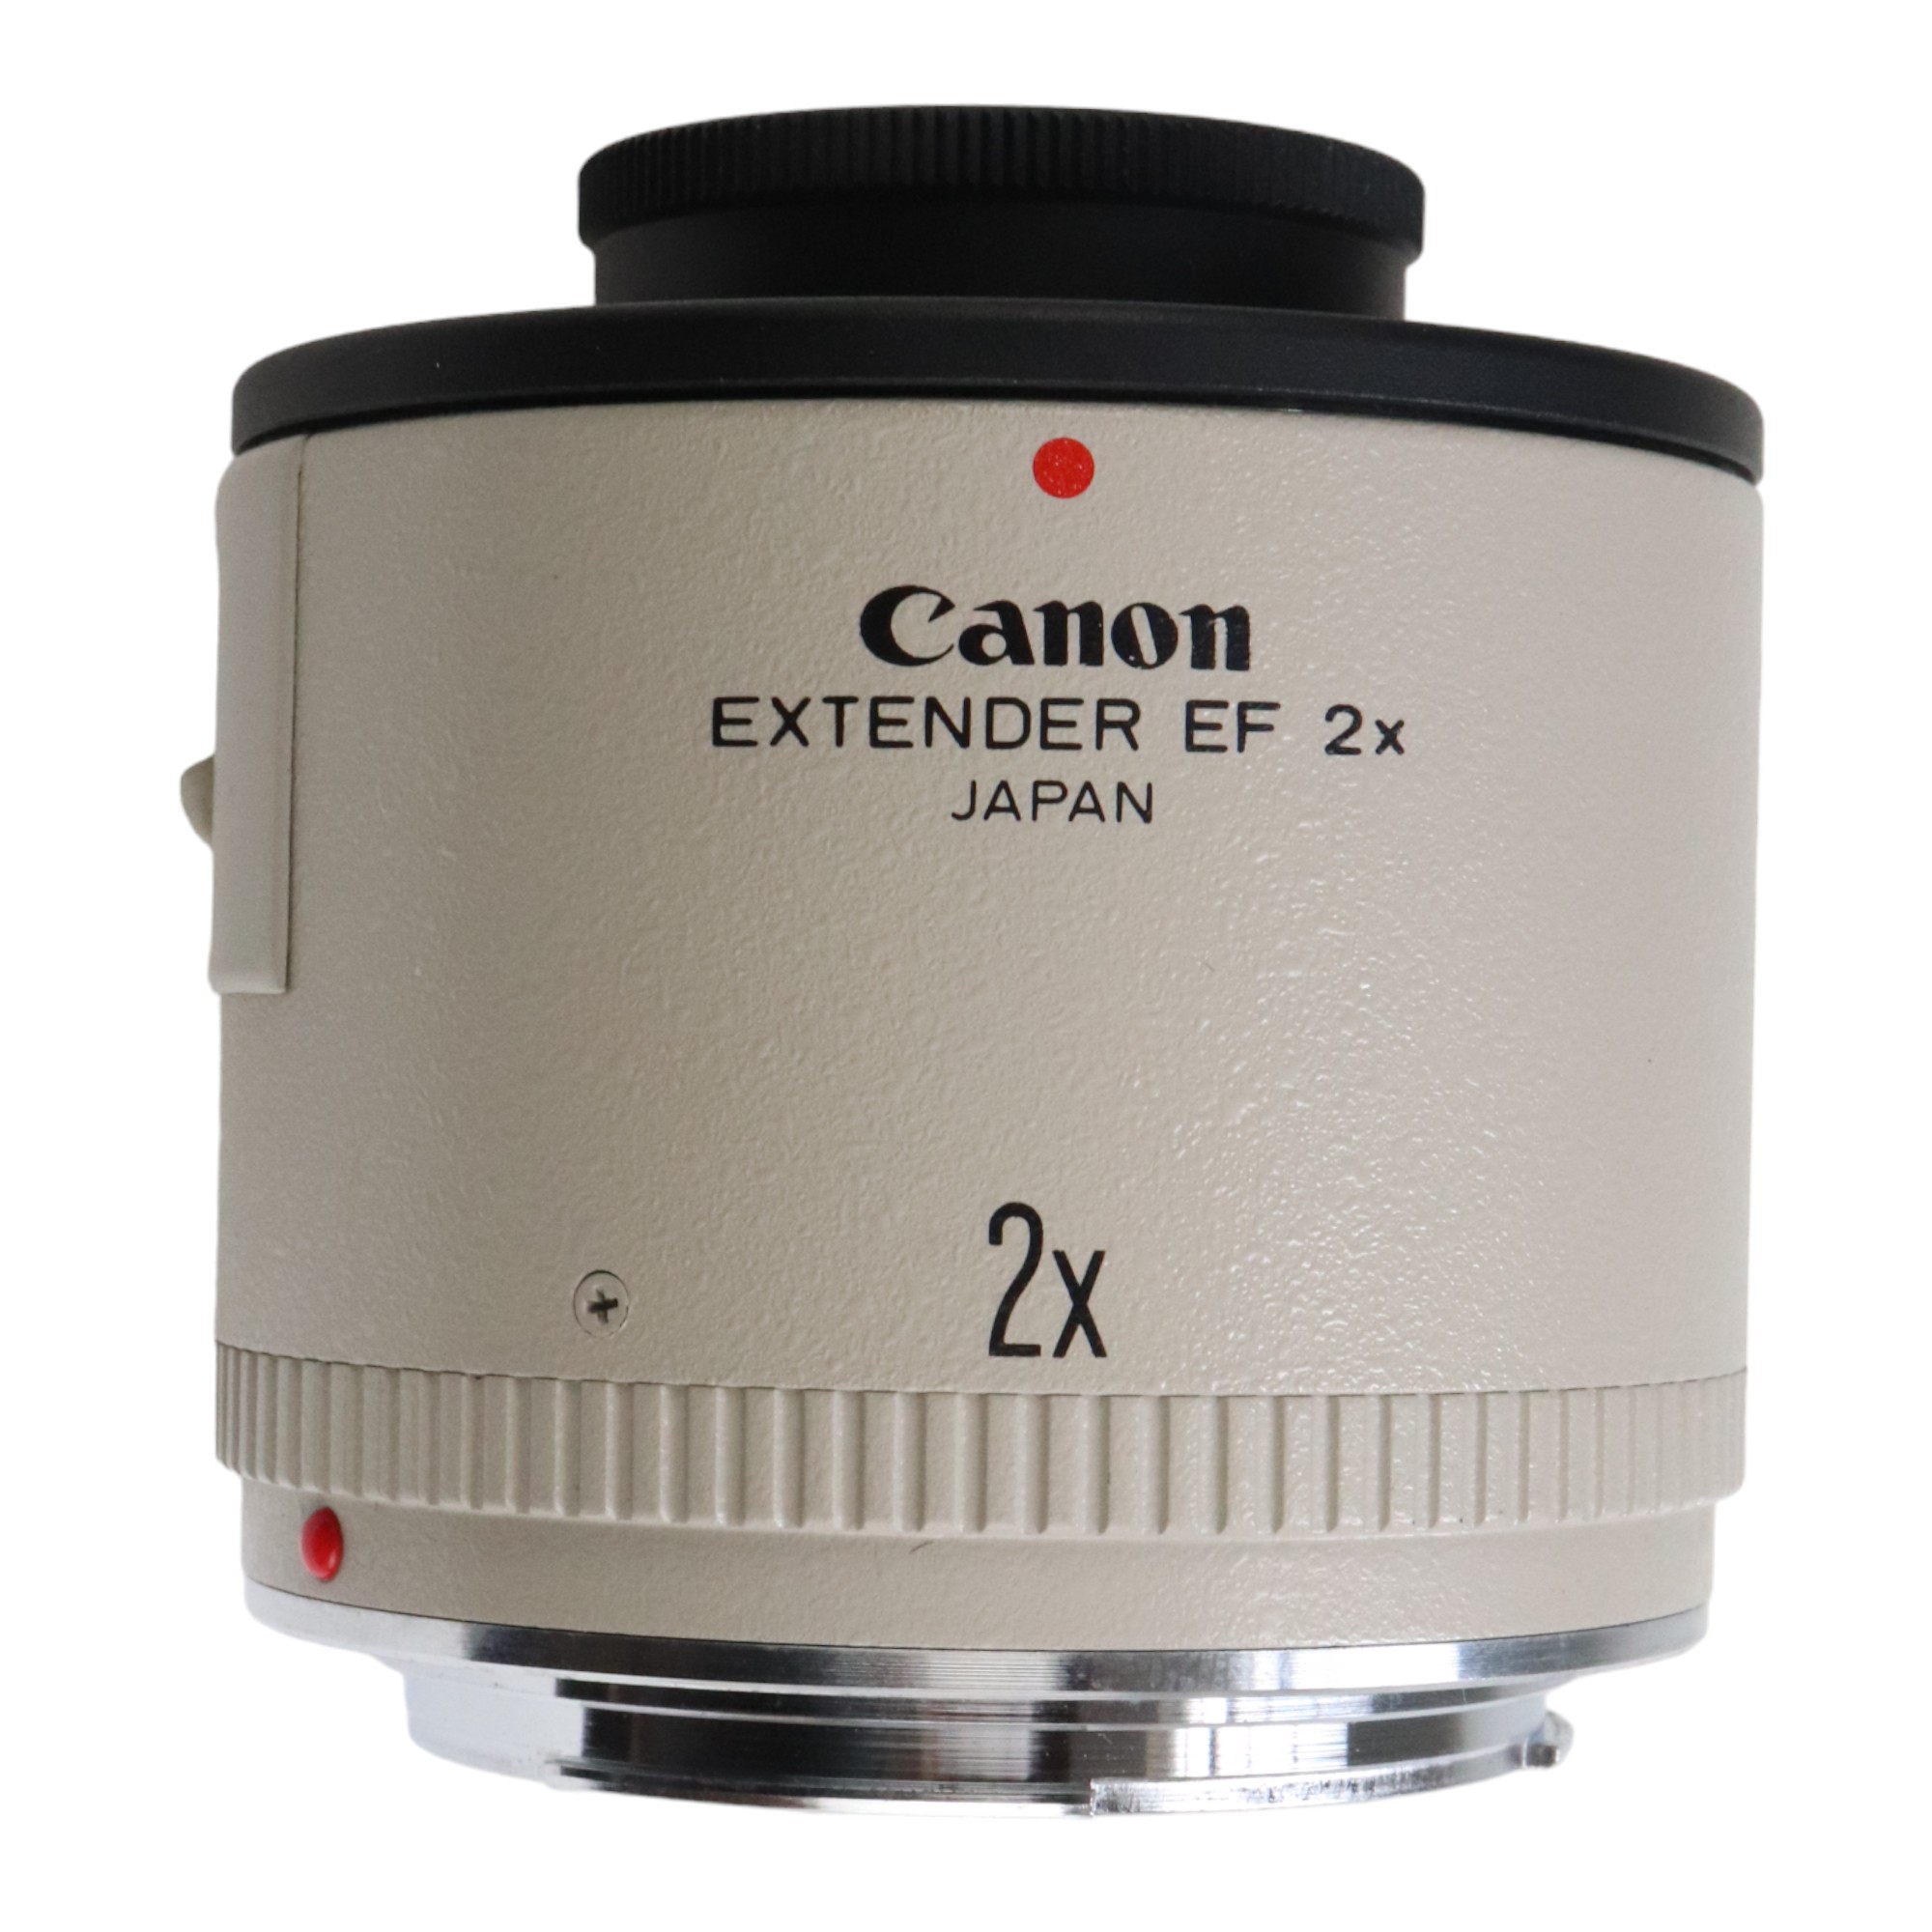 A Canon EOS 5D digital single-lens reflex camera mounted with an Ultrasonic Canon Zoom EF 28-70mm - Image 9 of 13